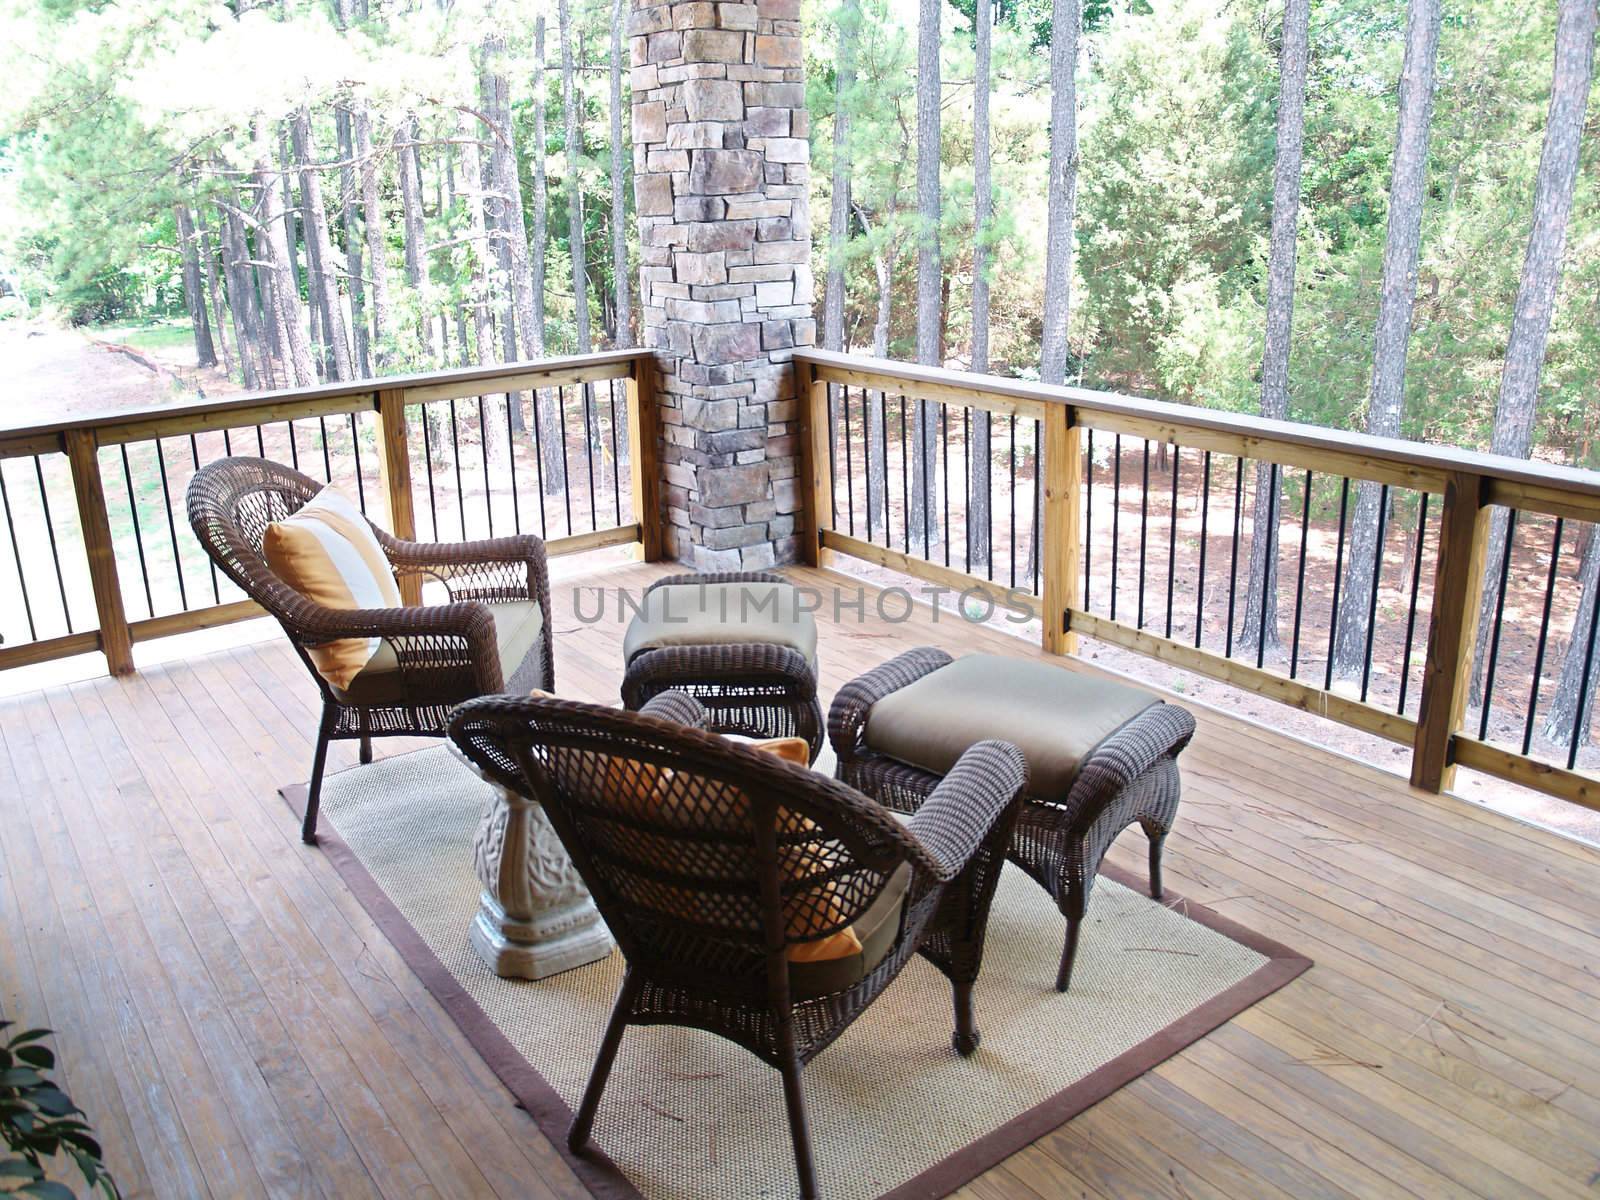 Wicker furniture sitting on a wooden deck overlooking a pine tree forest